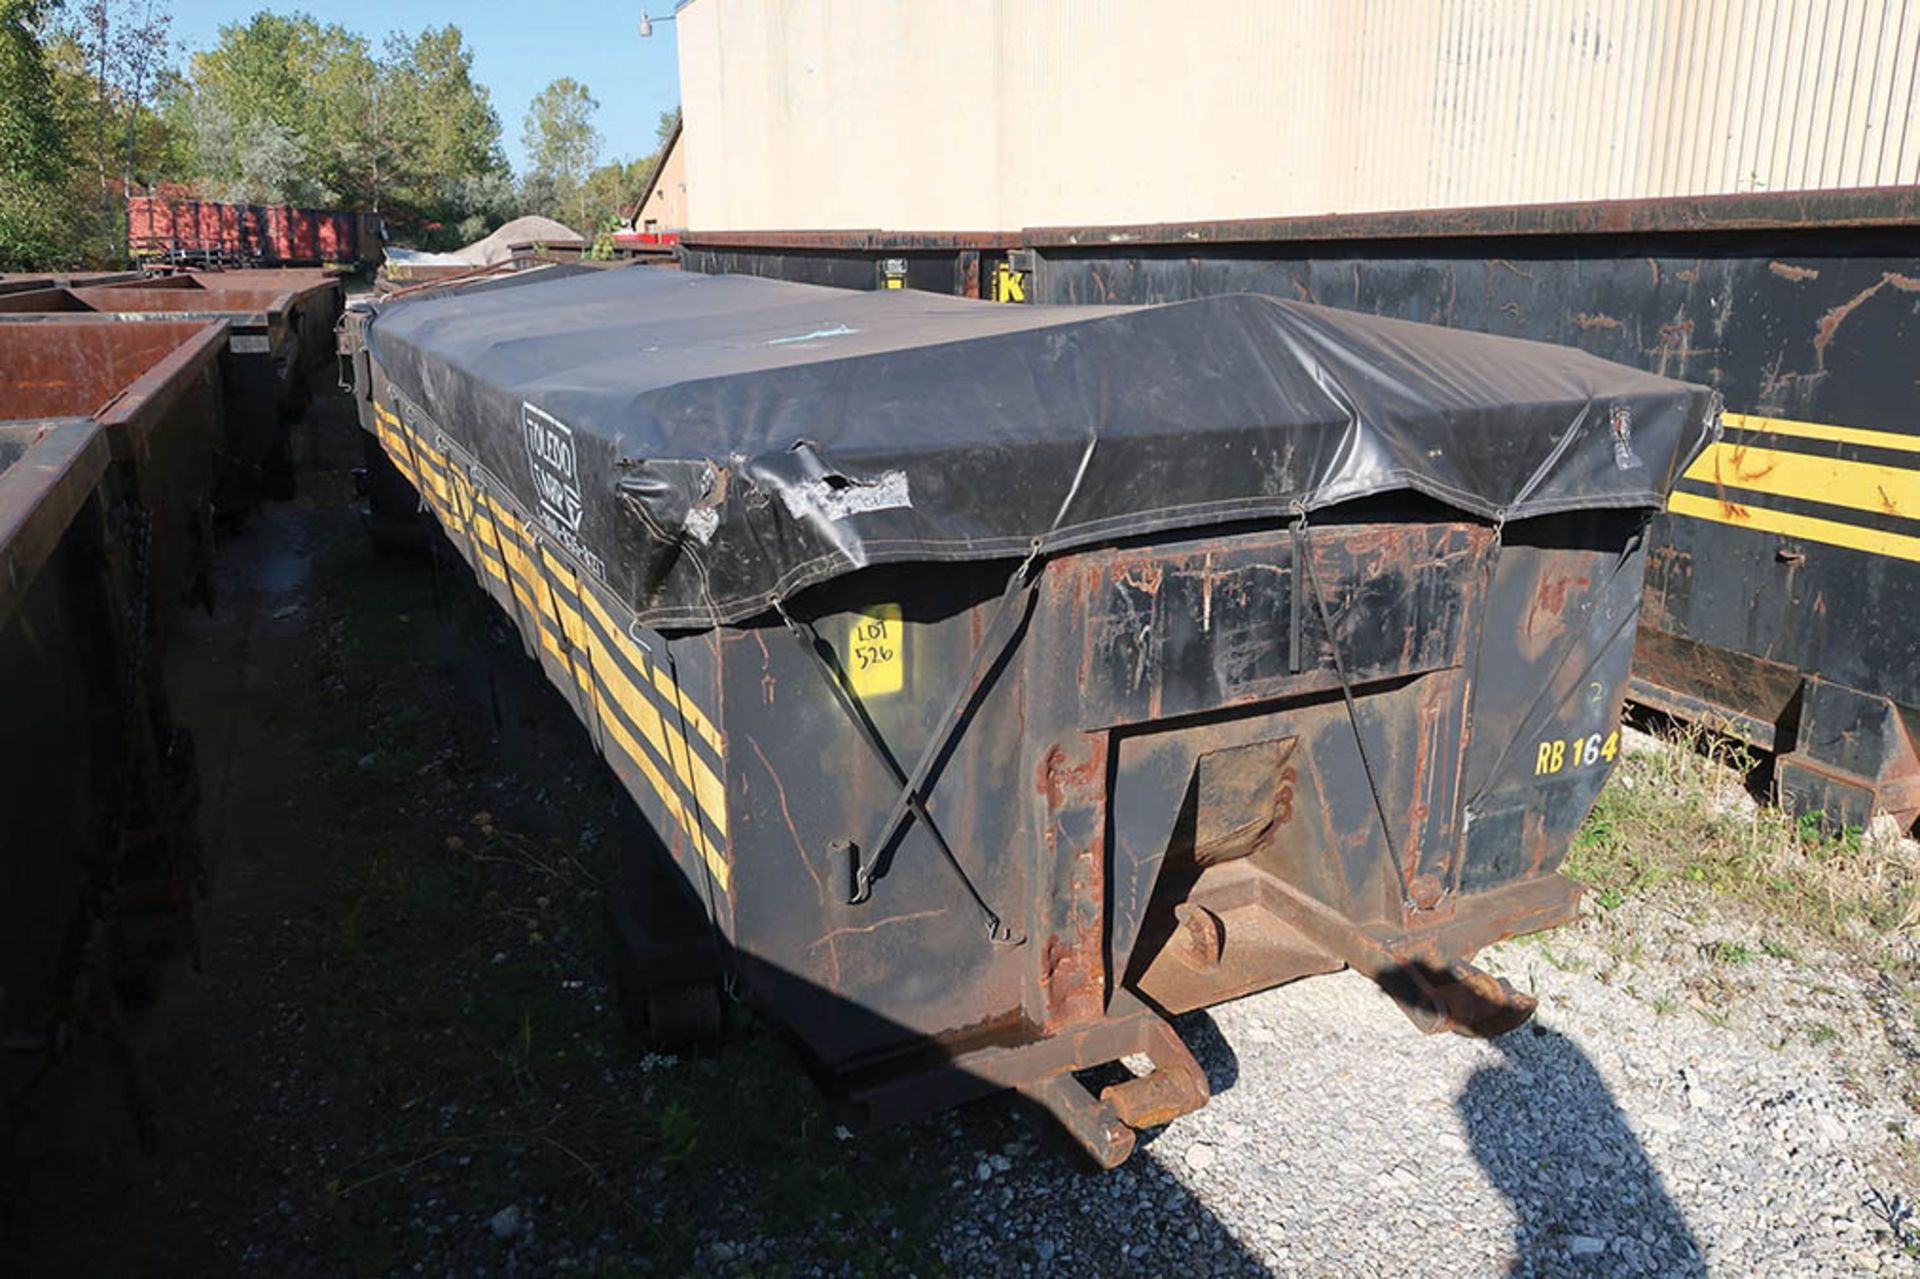 30 CU. YARD ROLL-OFF CONTAINER, RB164 ***LOCATED IN MIDLAND, MICHIGAN**